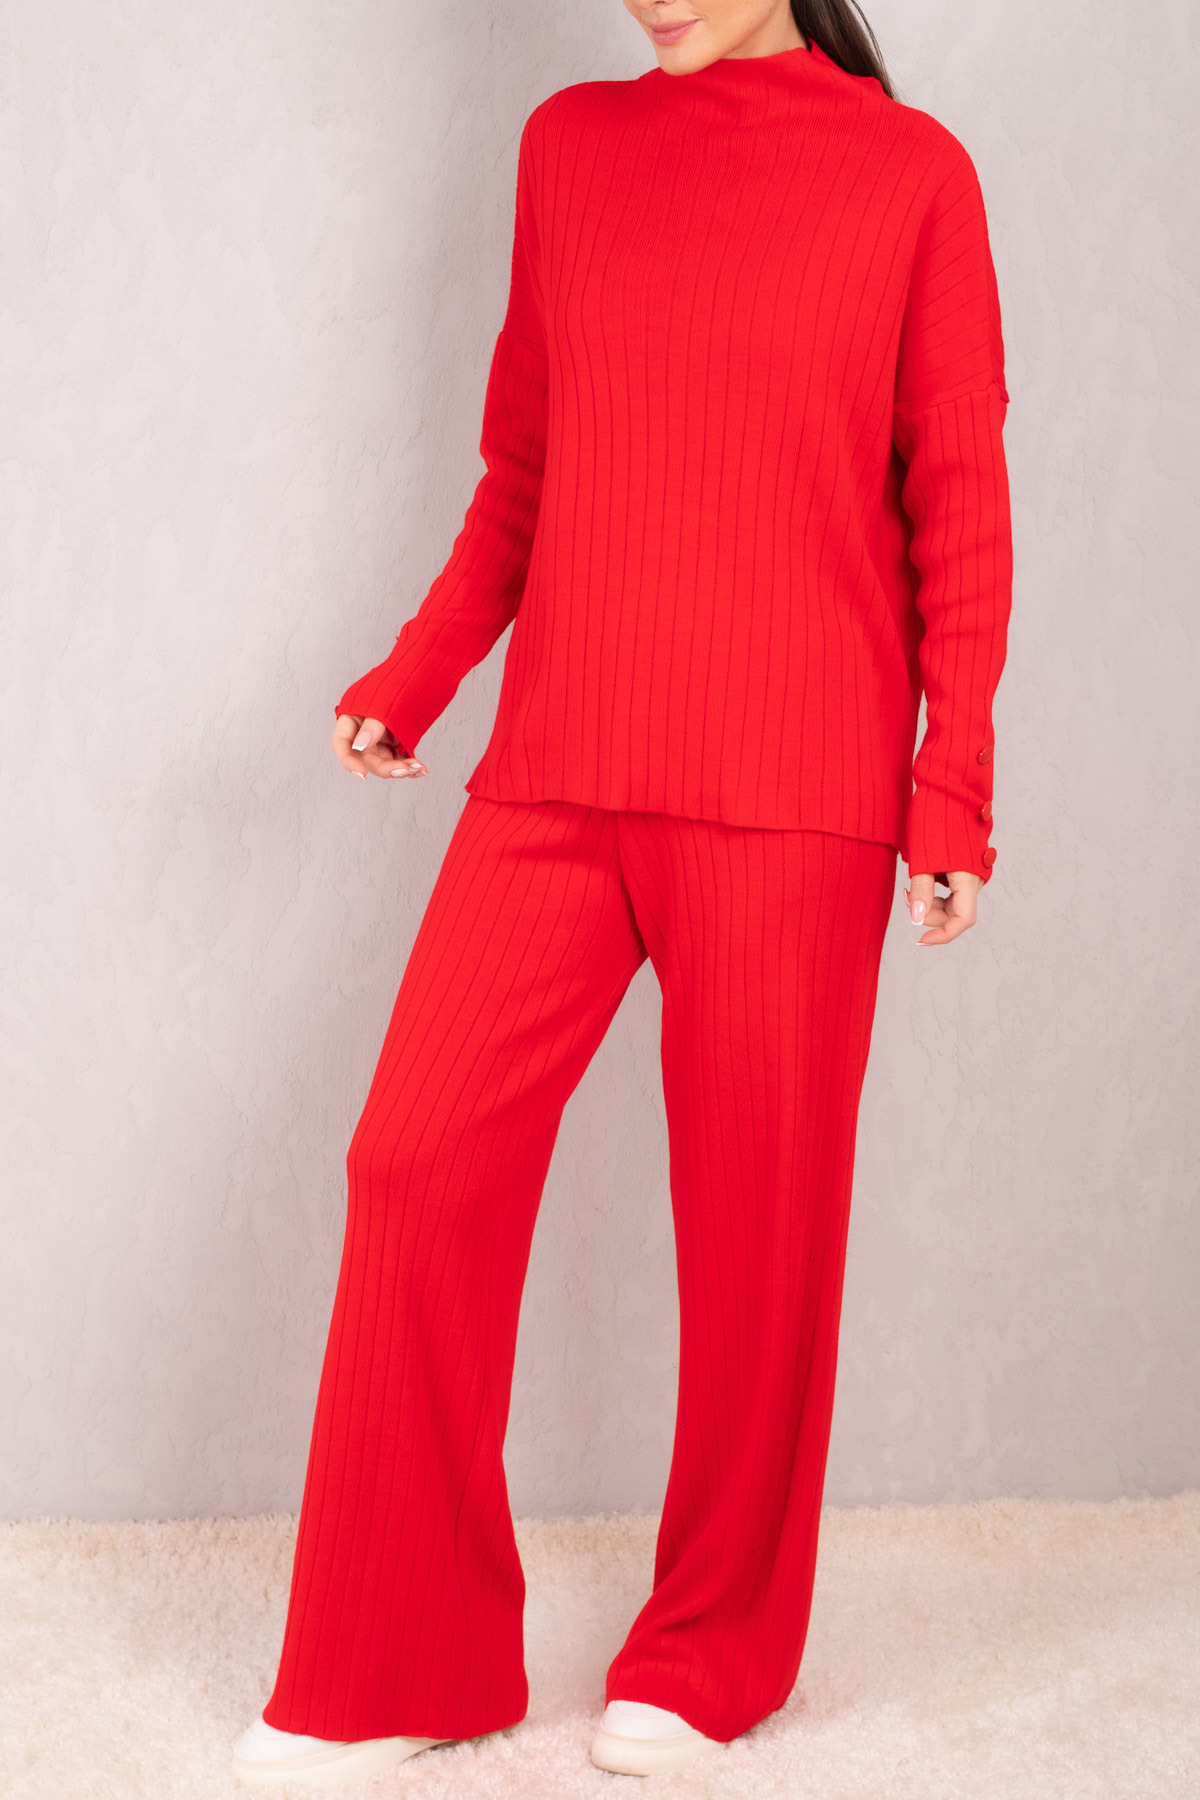 Levně armonika Women's Red Thick Ribbed High Neck Sleeve Buttoned Knitwear Suit